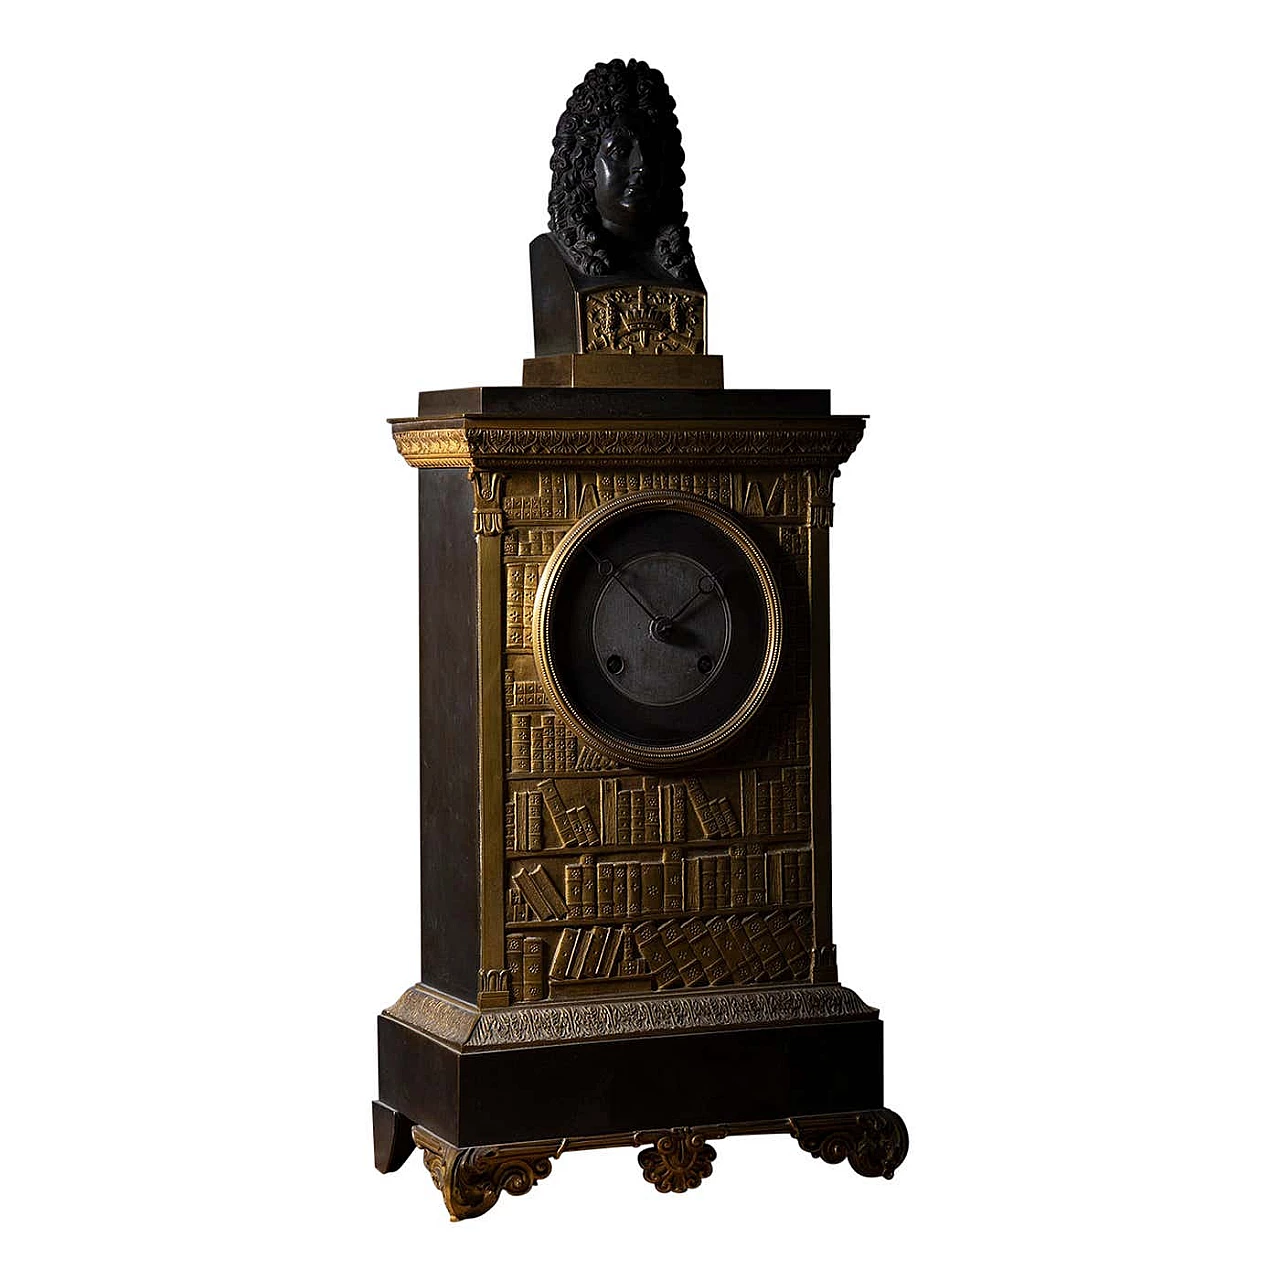 Gilt bronze clock in the style of Louis XIV with engraving of a library, 19th century 1